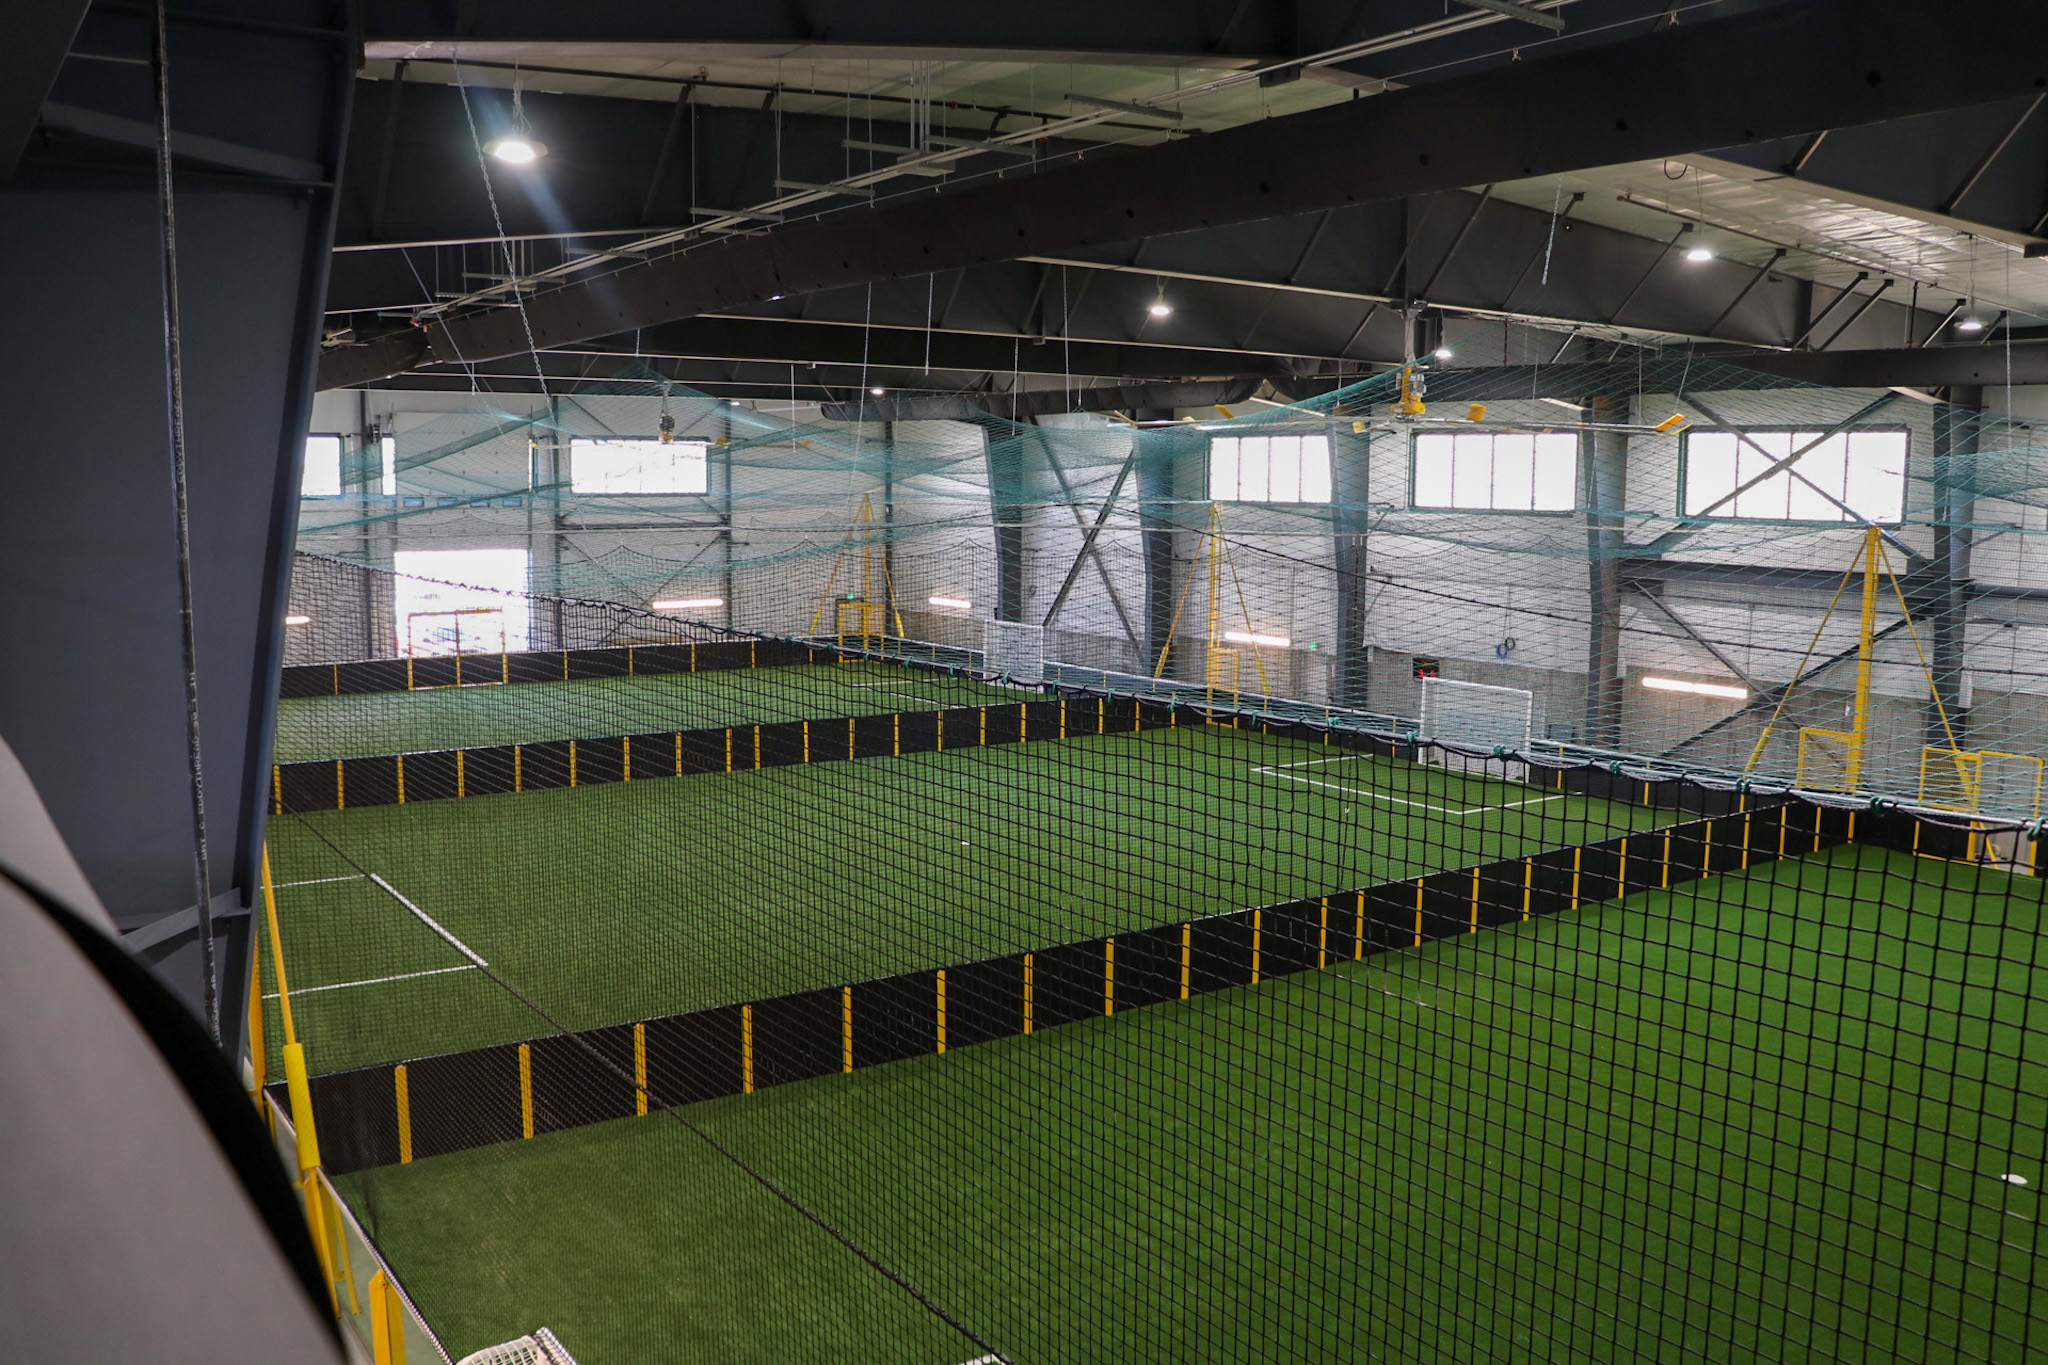 JH Indoor is open and offering indoor sports all year long